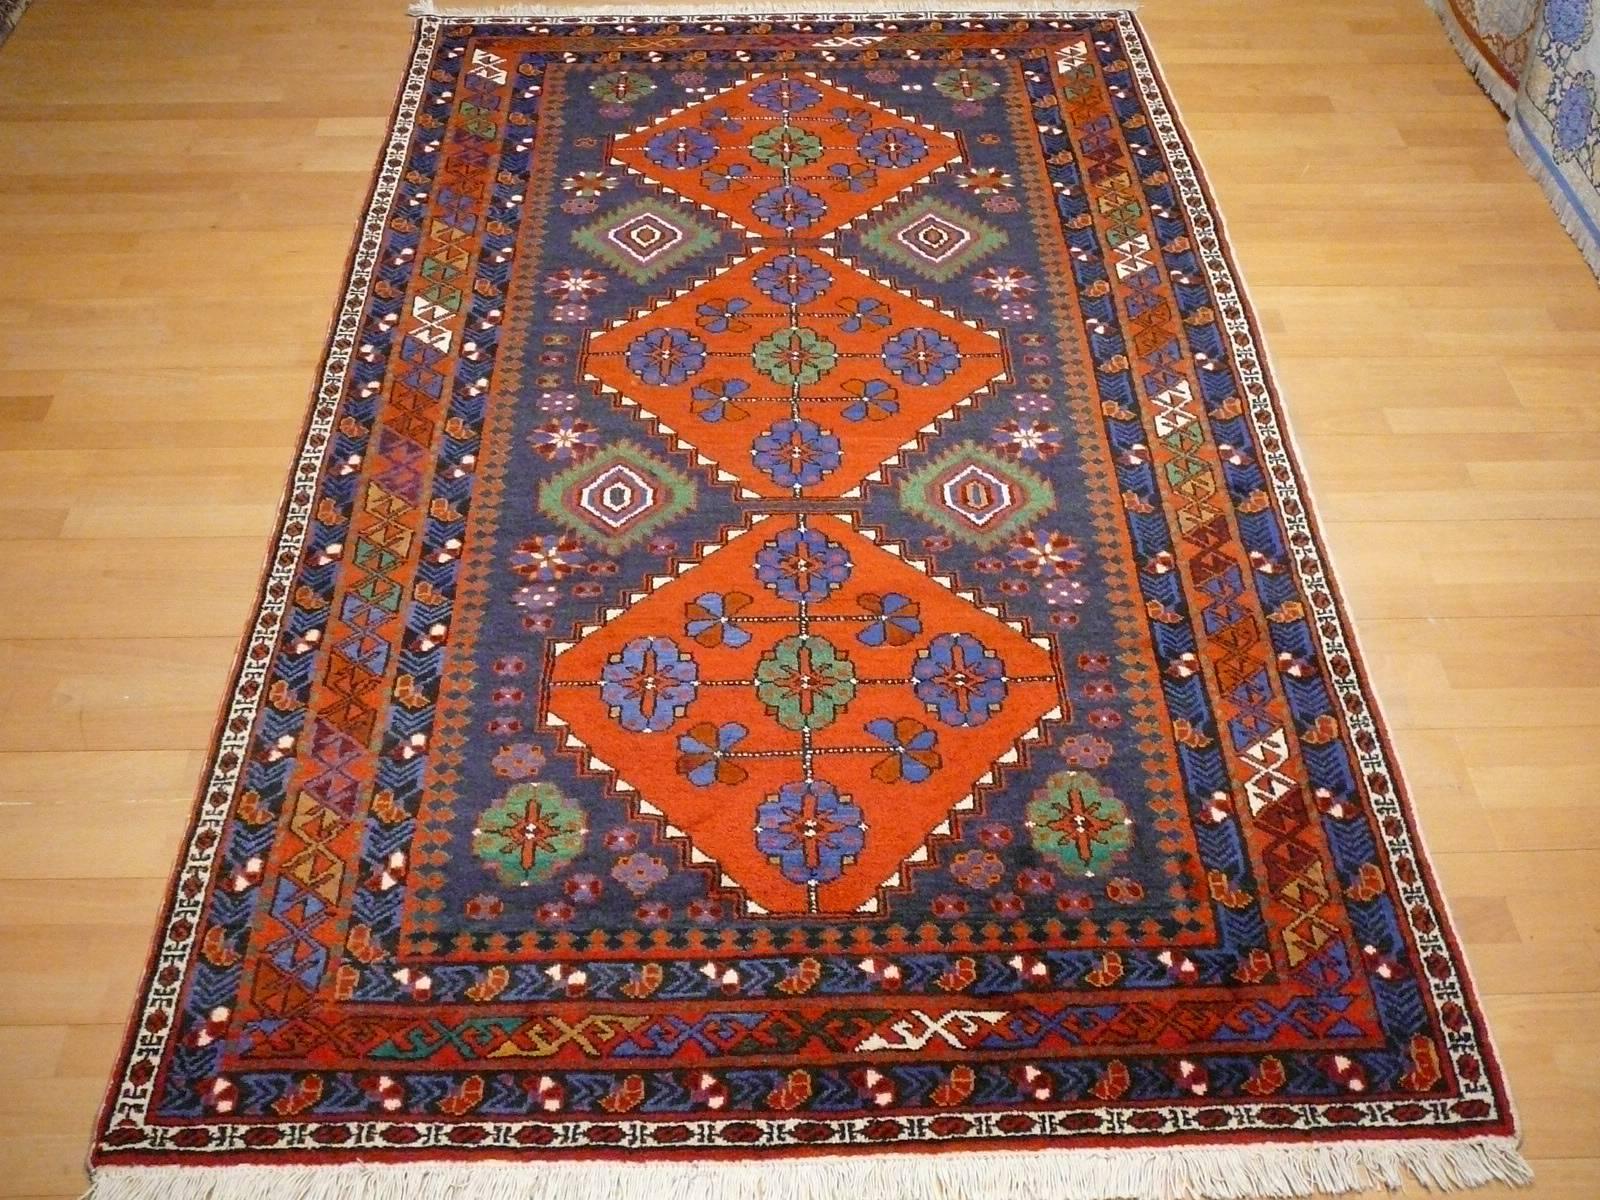 Hand-knotted Caucasian Shirvan rug in very good condition. Wool pile on cotton warp.